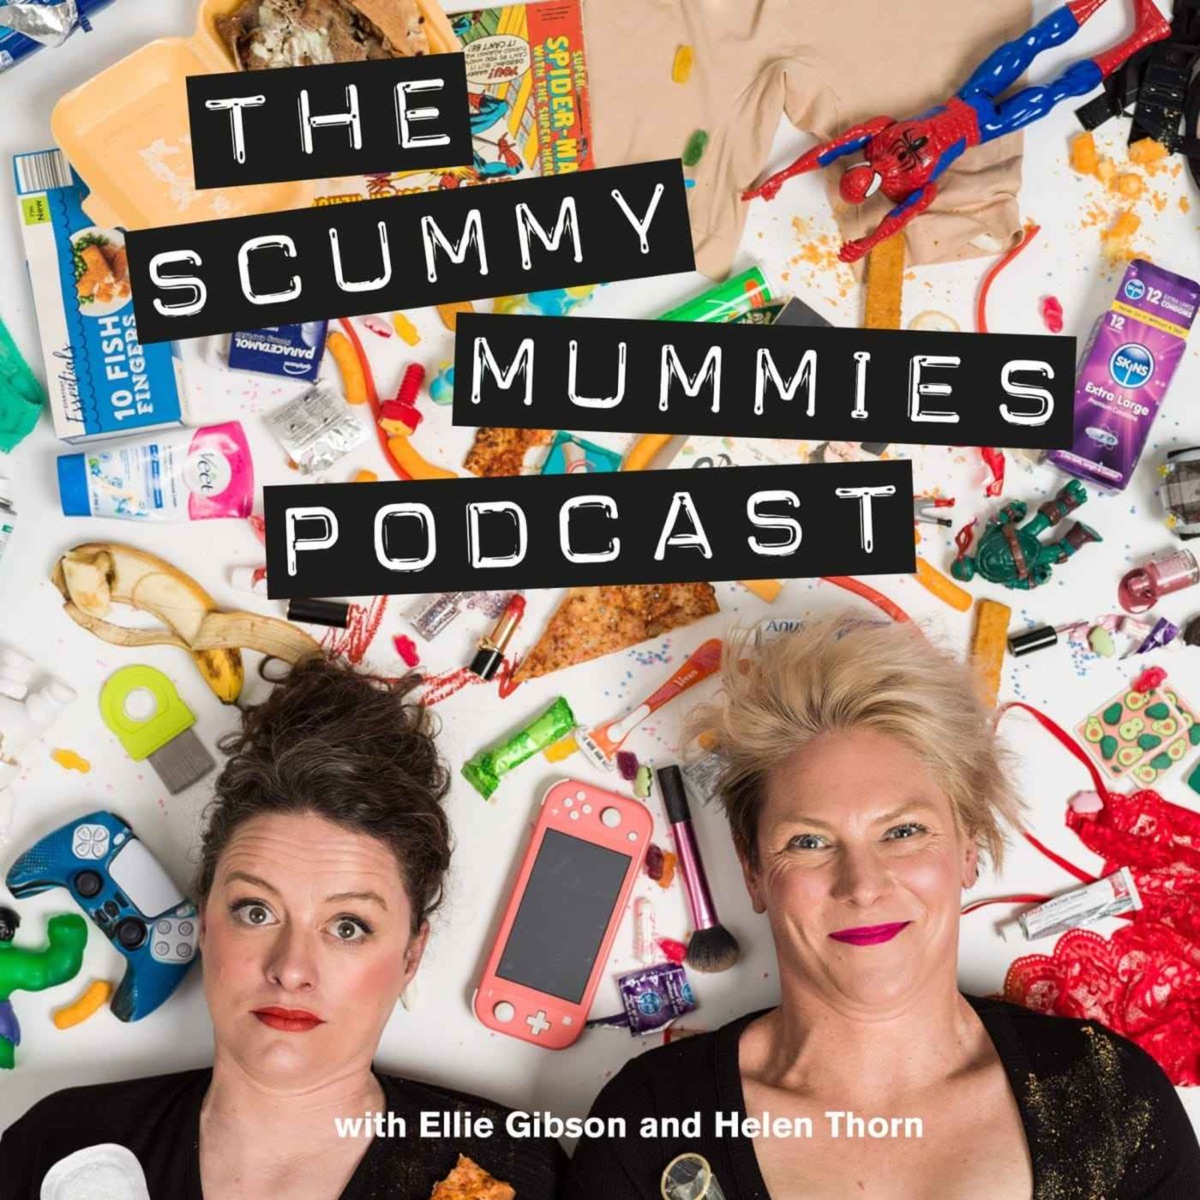 Hairy Pussy Celebrity Indecent Exposure - The Scummy Mummies Podcast â€“ Podcast â€“ Podtail